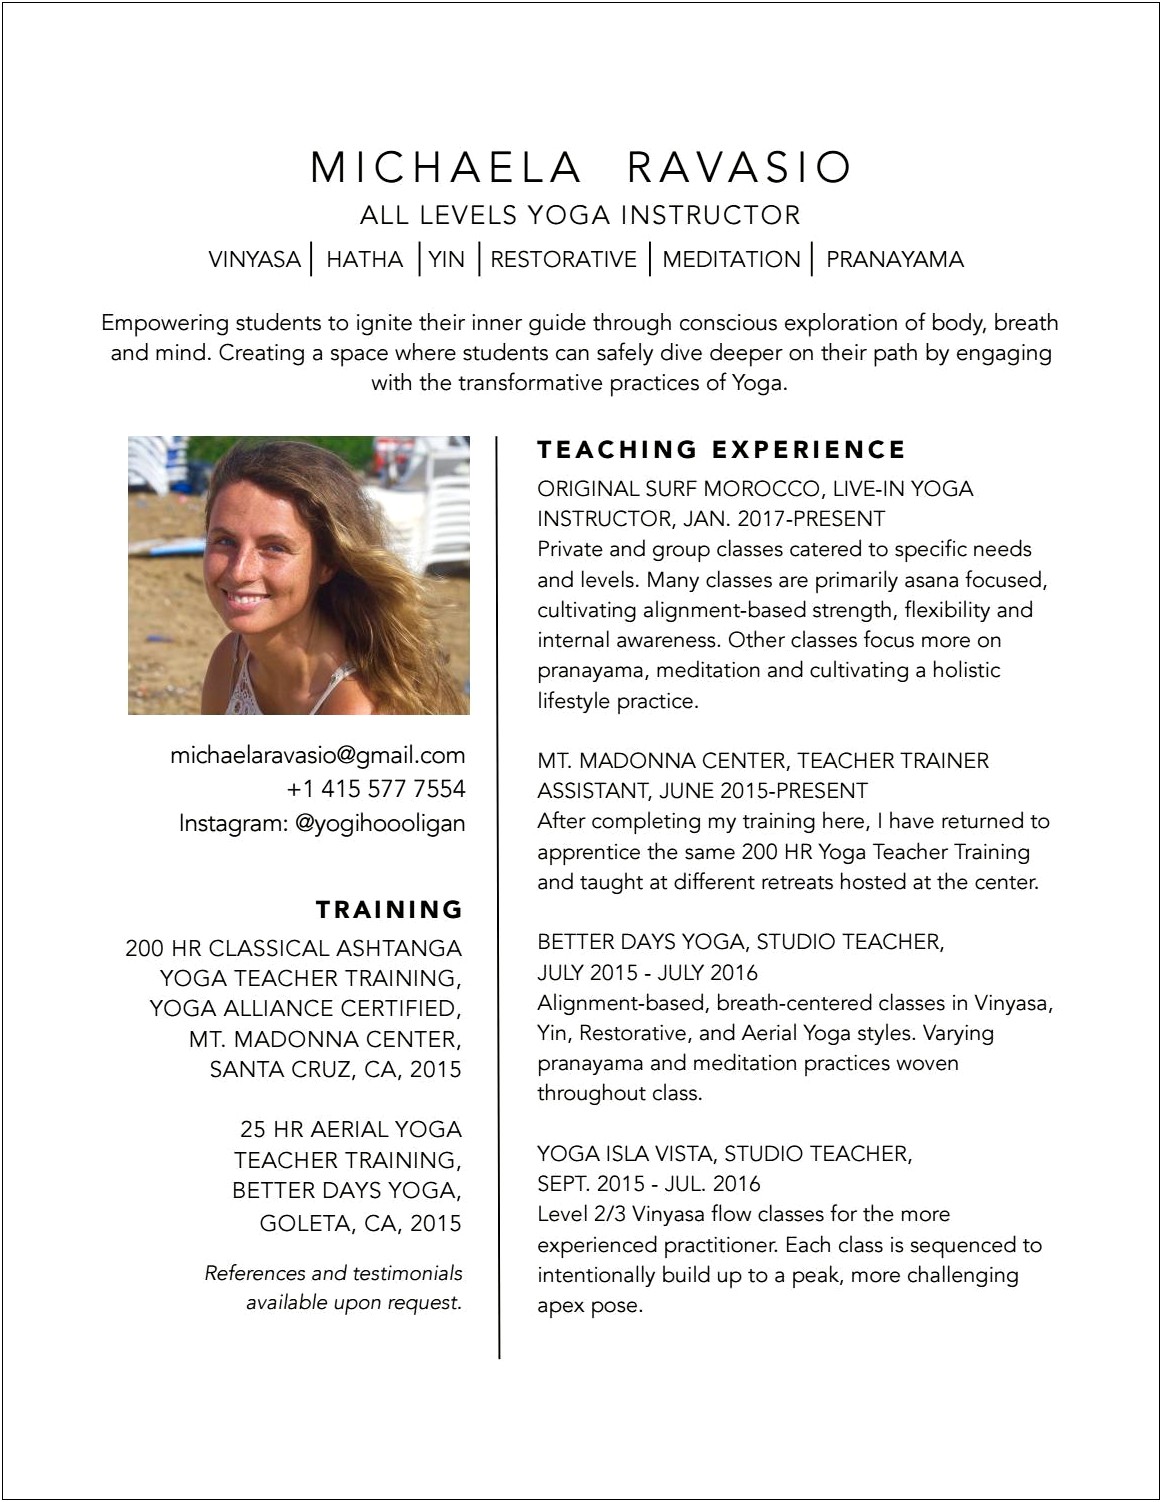 Resume For A Yoga Instructor With Little Experience